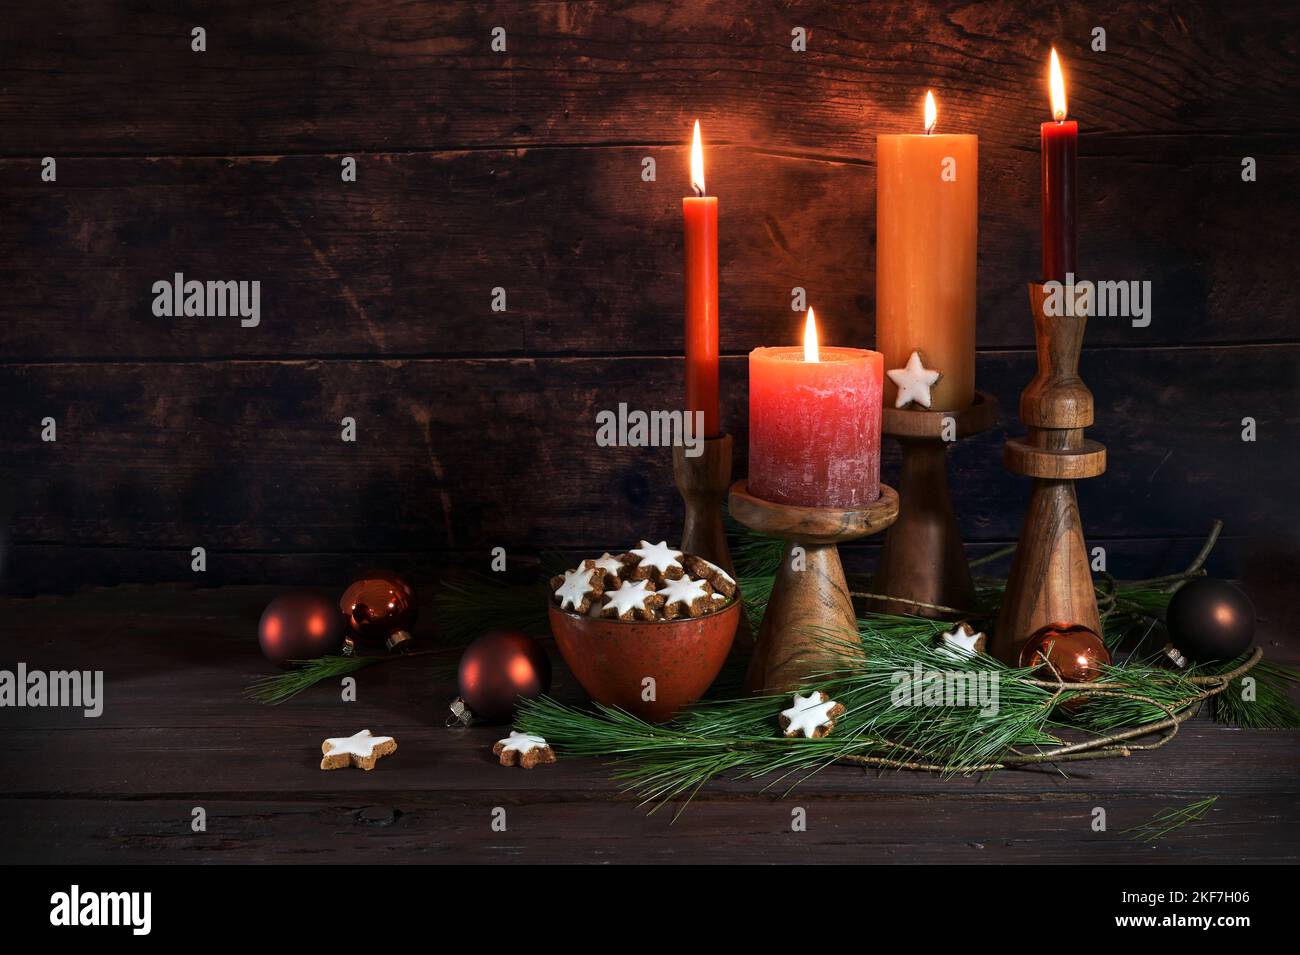 Four candles for Advent, Christmas decoration, cinnamon stars and pine branches against a dark rustic wooden background, copy space, selected focus Stock Photo